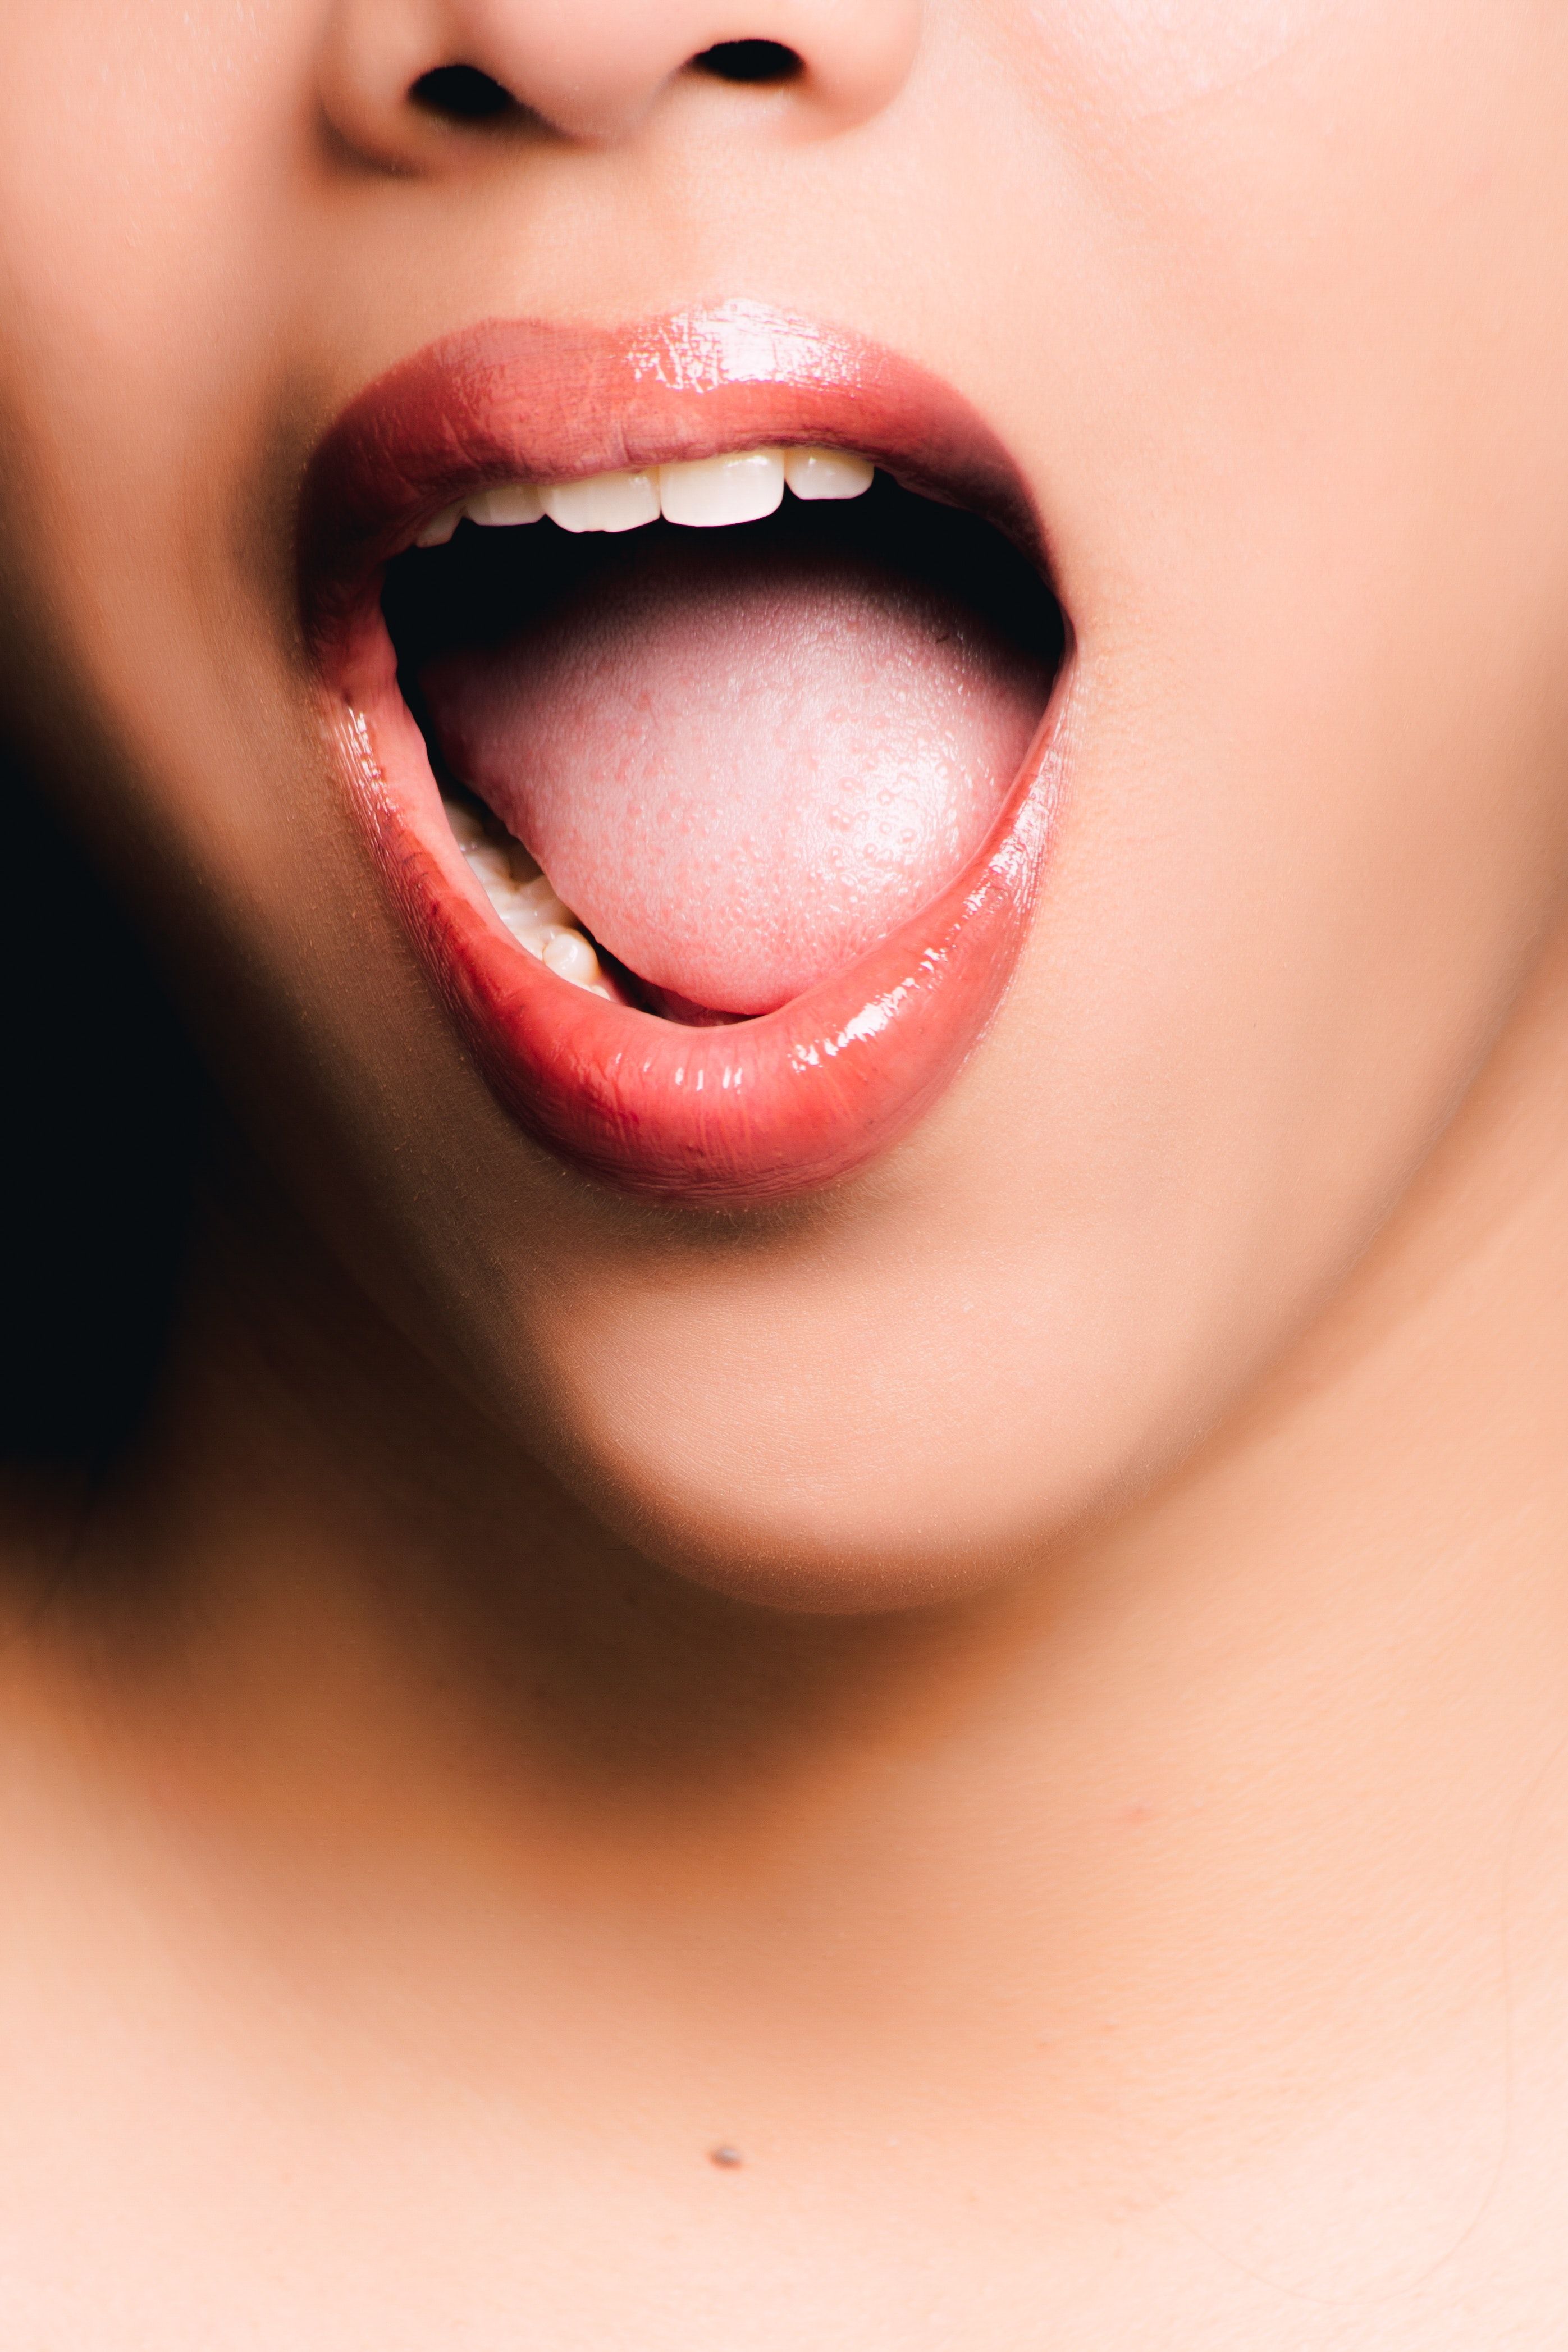 Woman Opening Her Mouth · Free